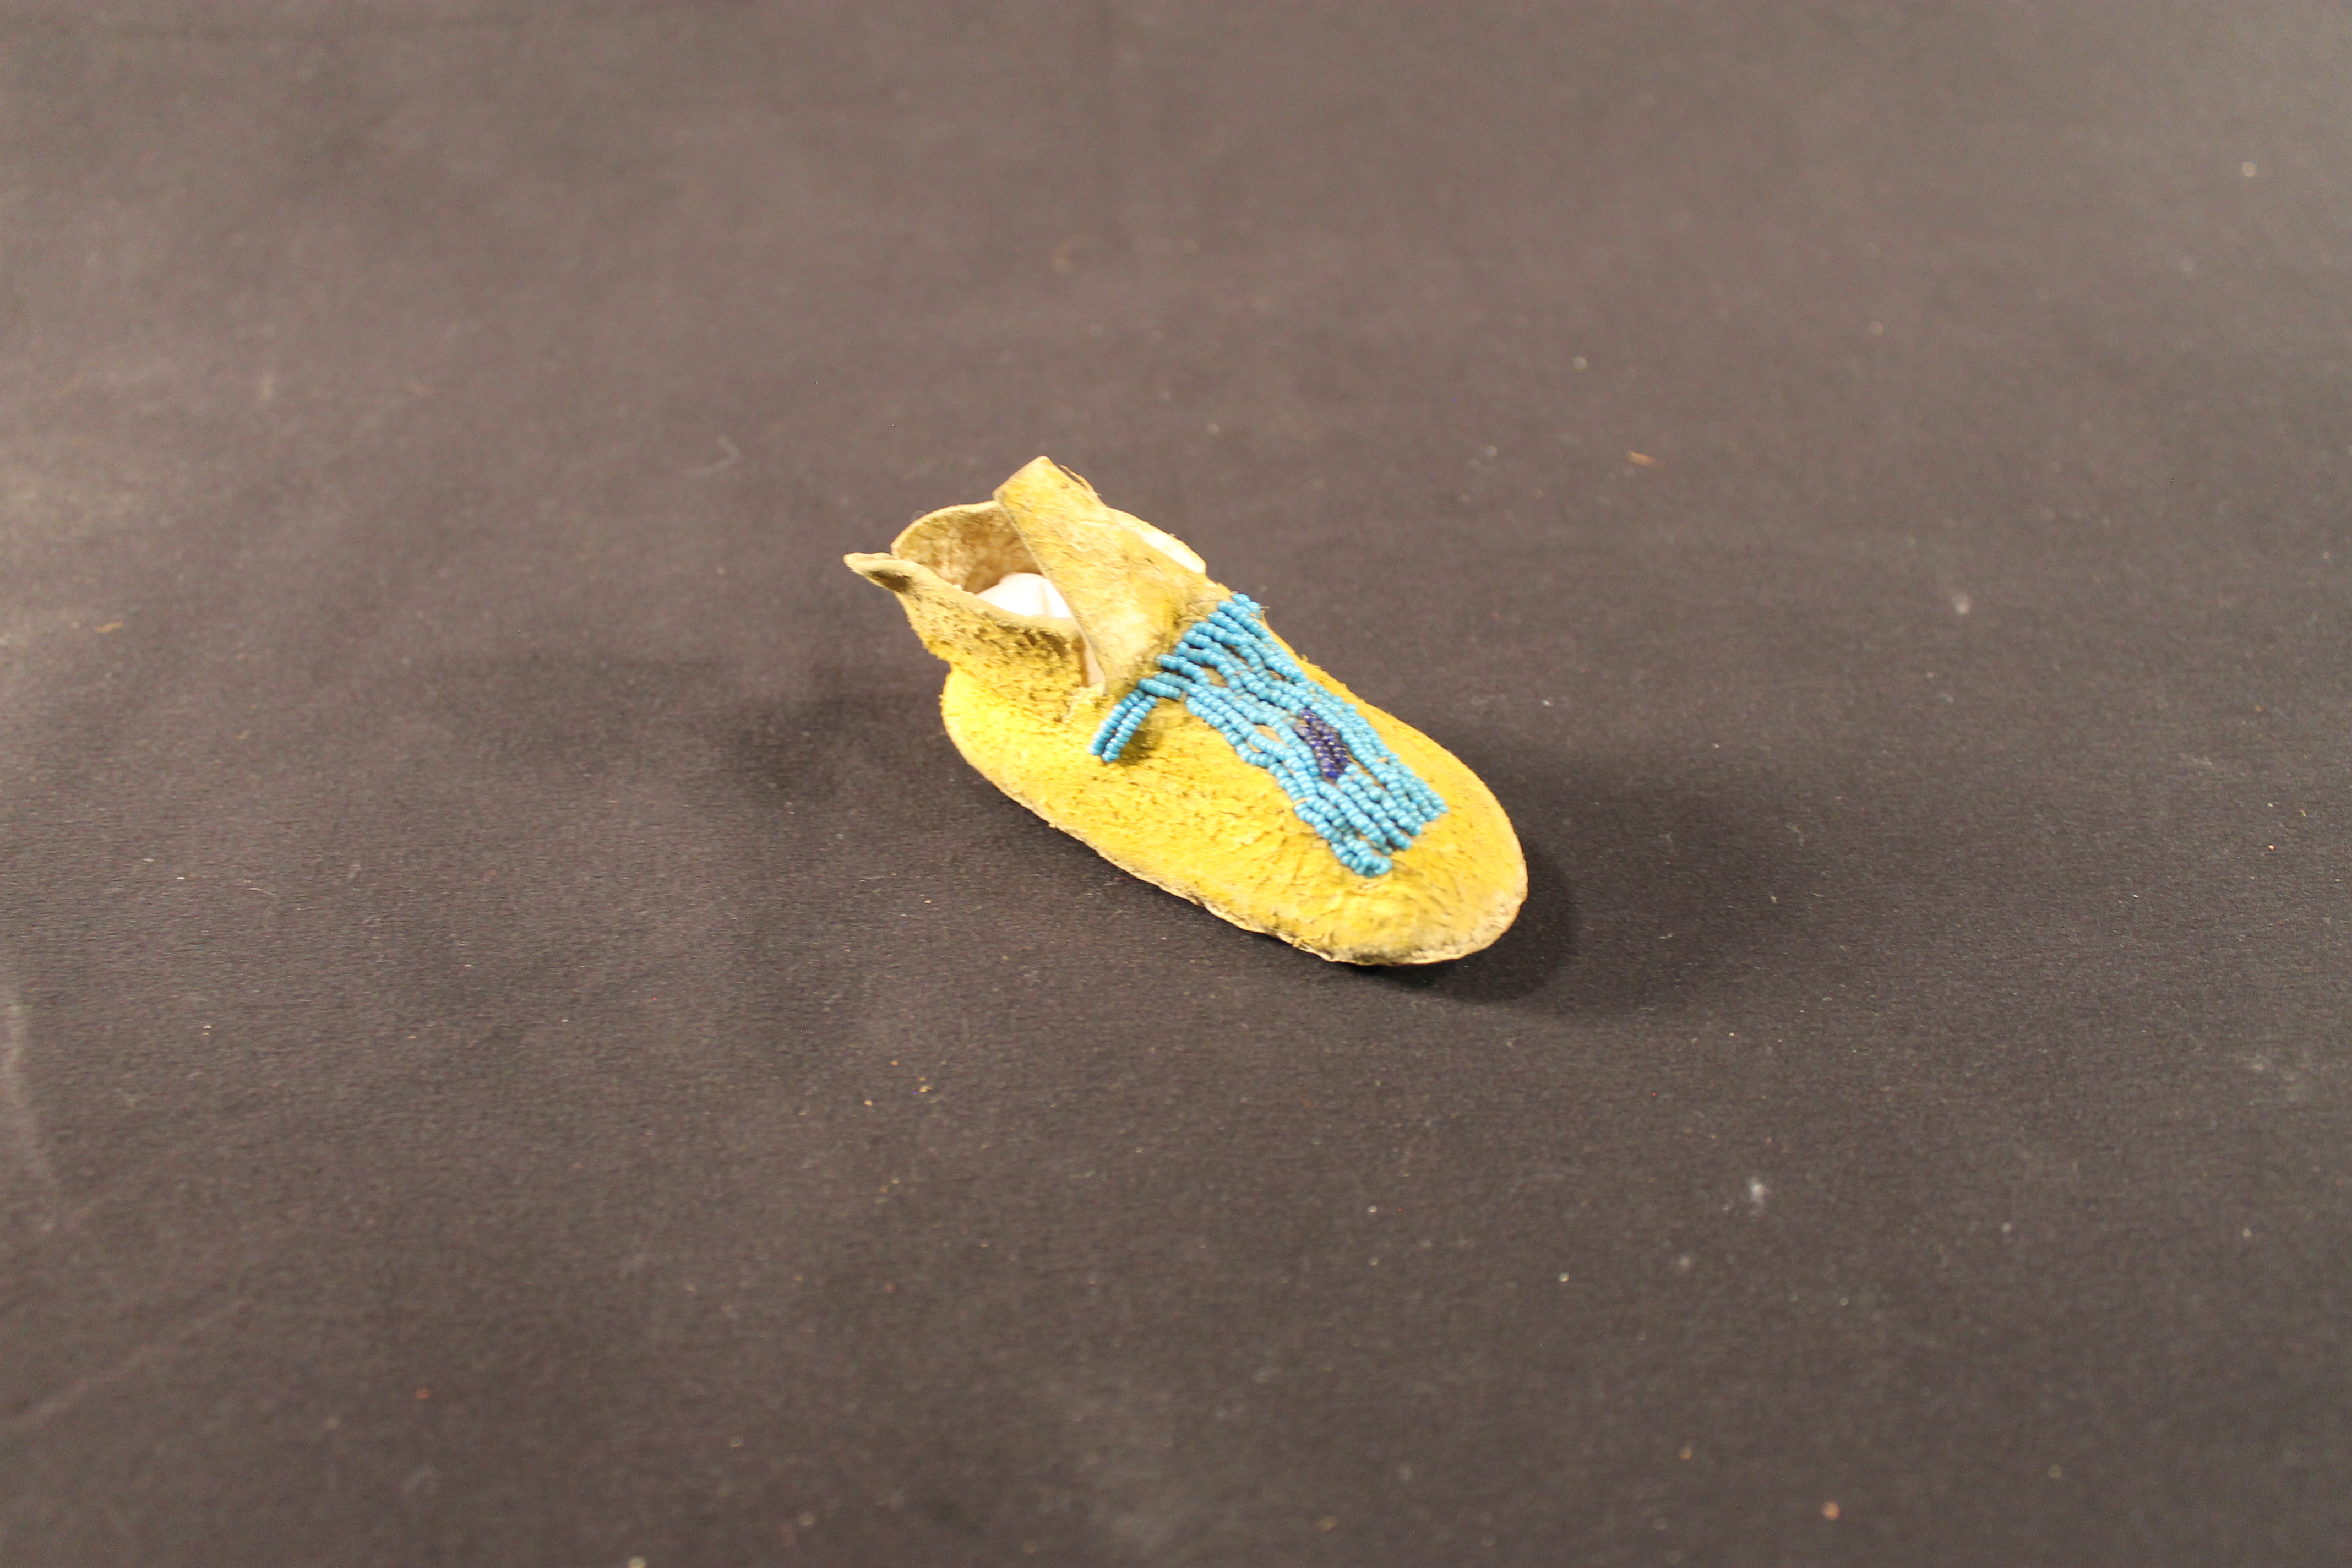 Baby-sized moccasin with a decorated front turquoise with attached black beads.